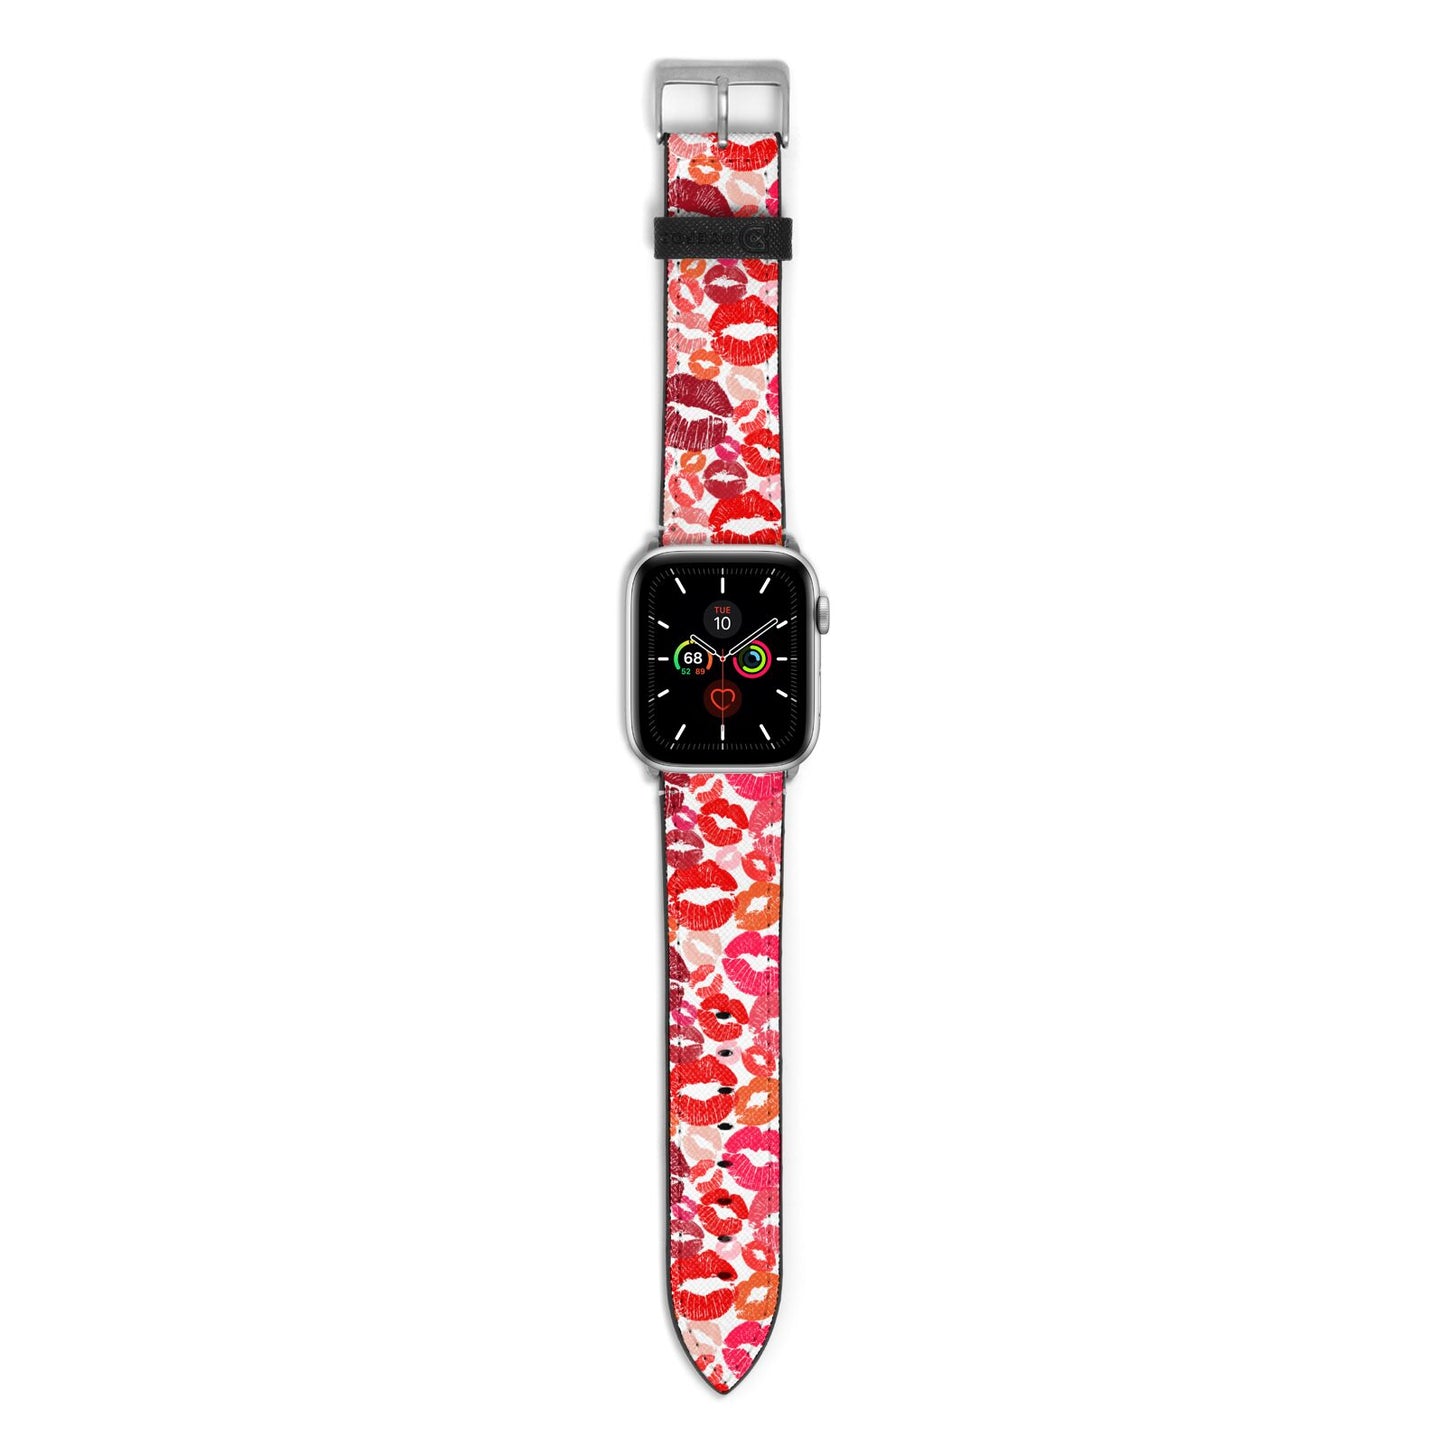 Kiss Print Apple Watch Strap with Silver Hardware